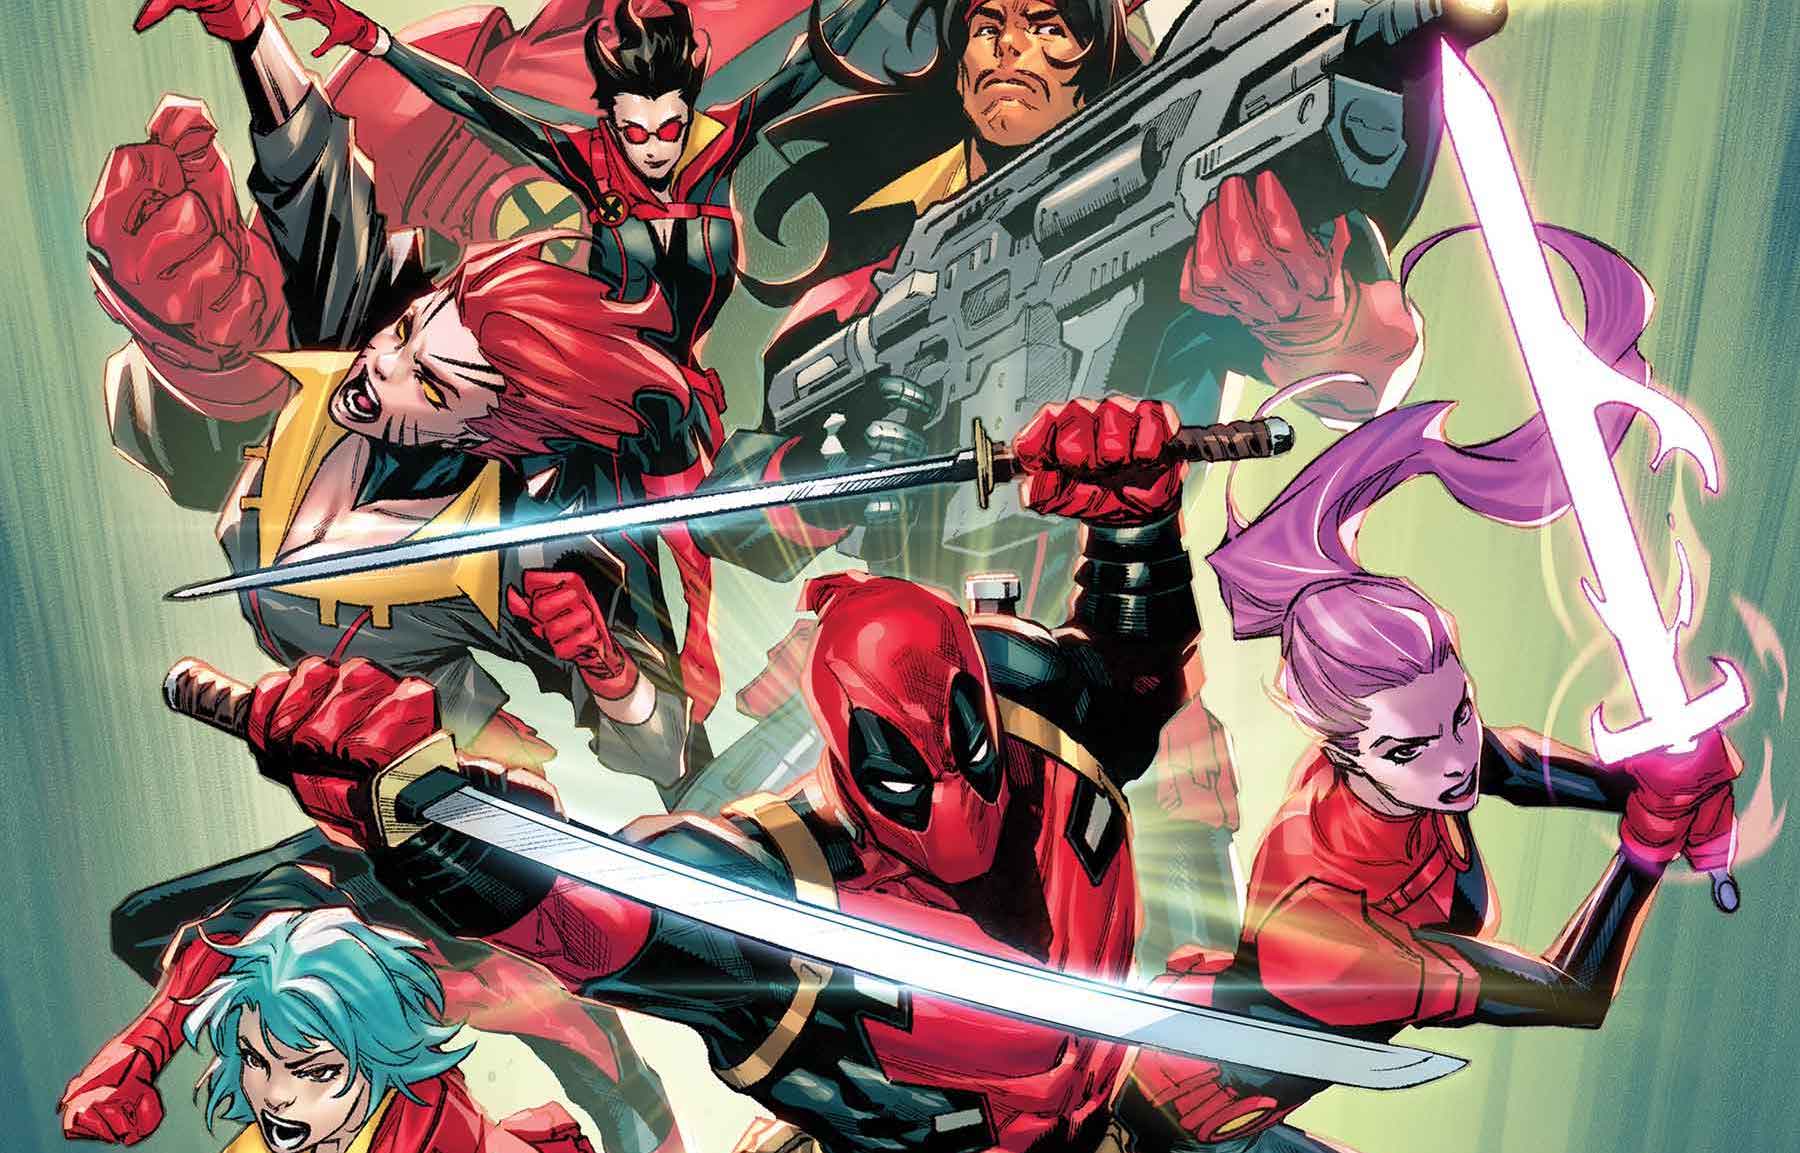 New 'X-Force' #1 to relaunch with creators Geoffrey Thorne and Marcus To